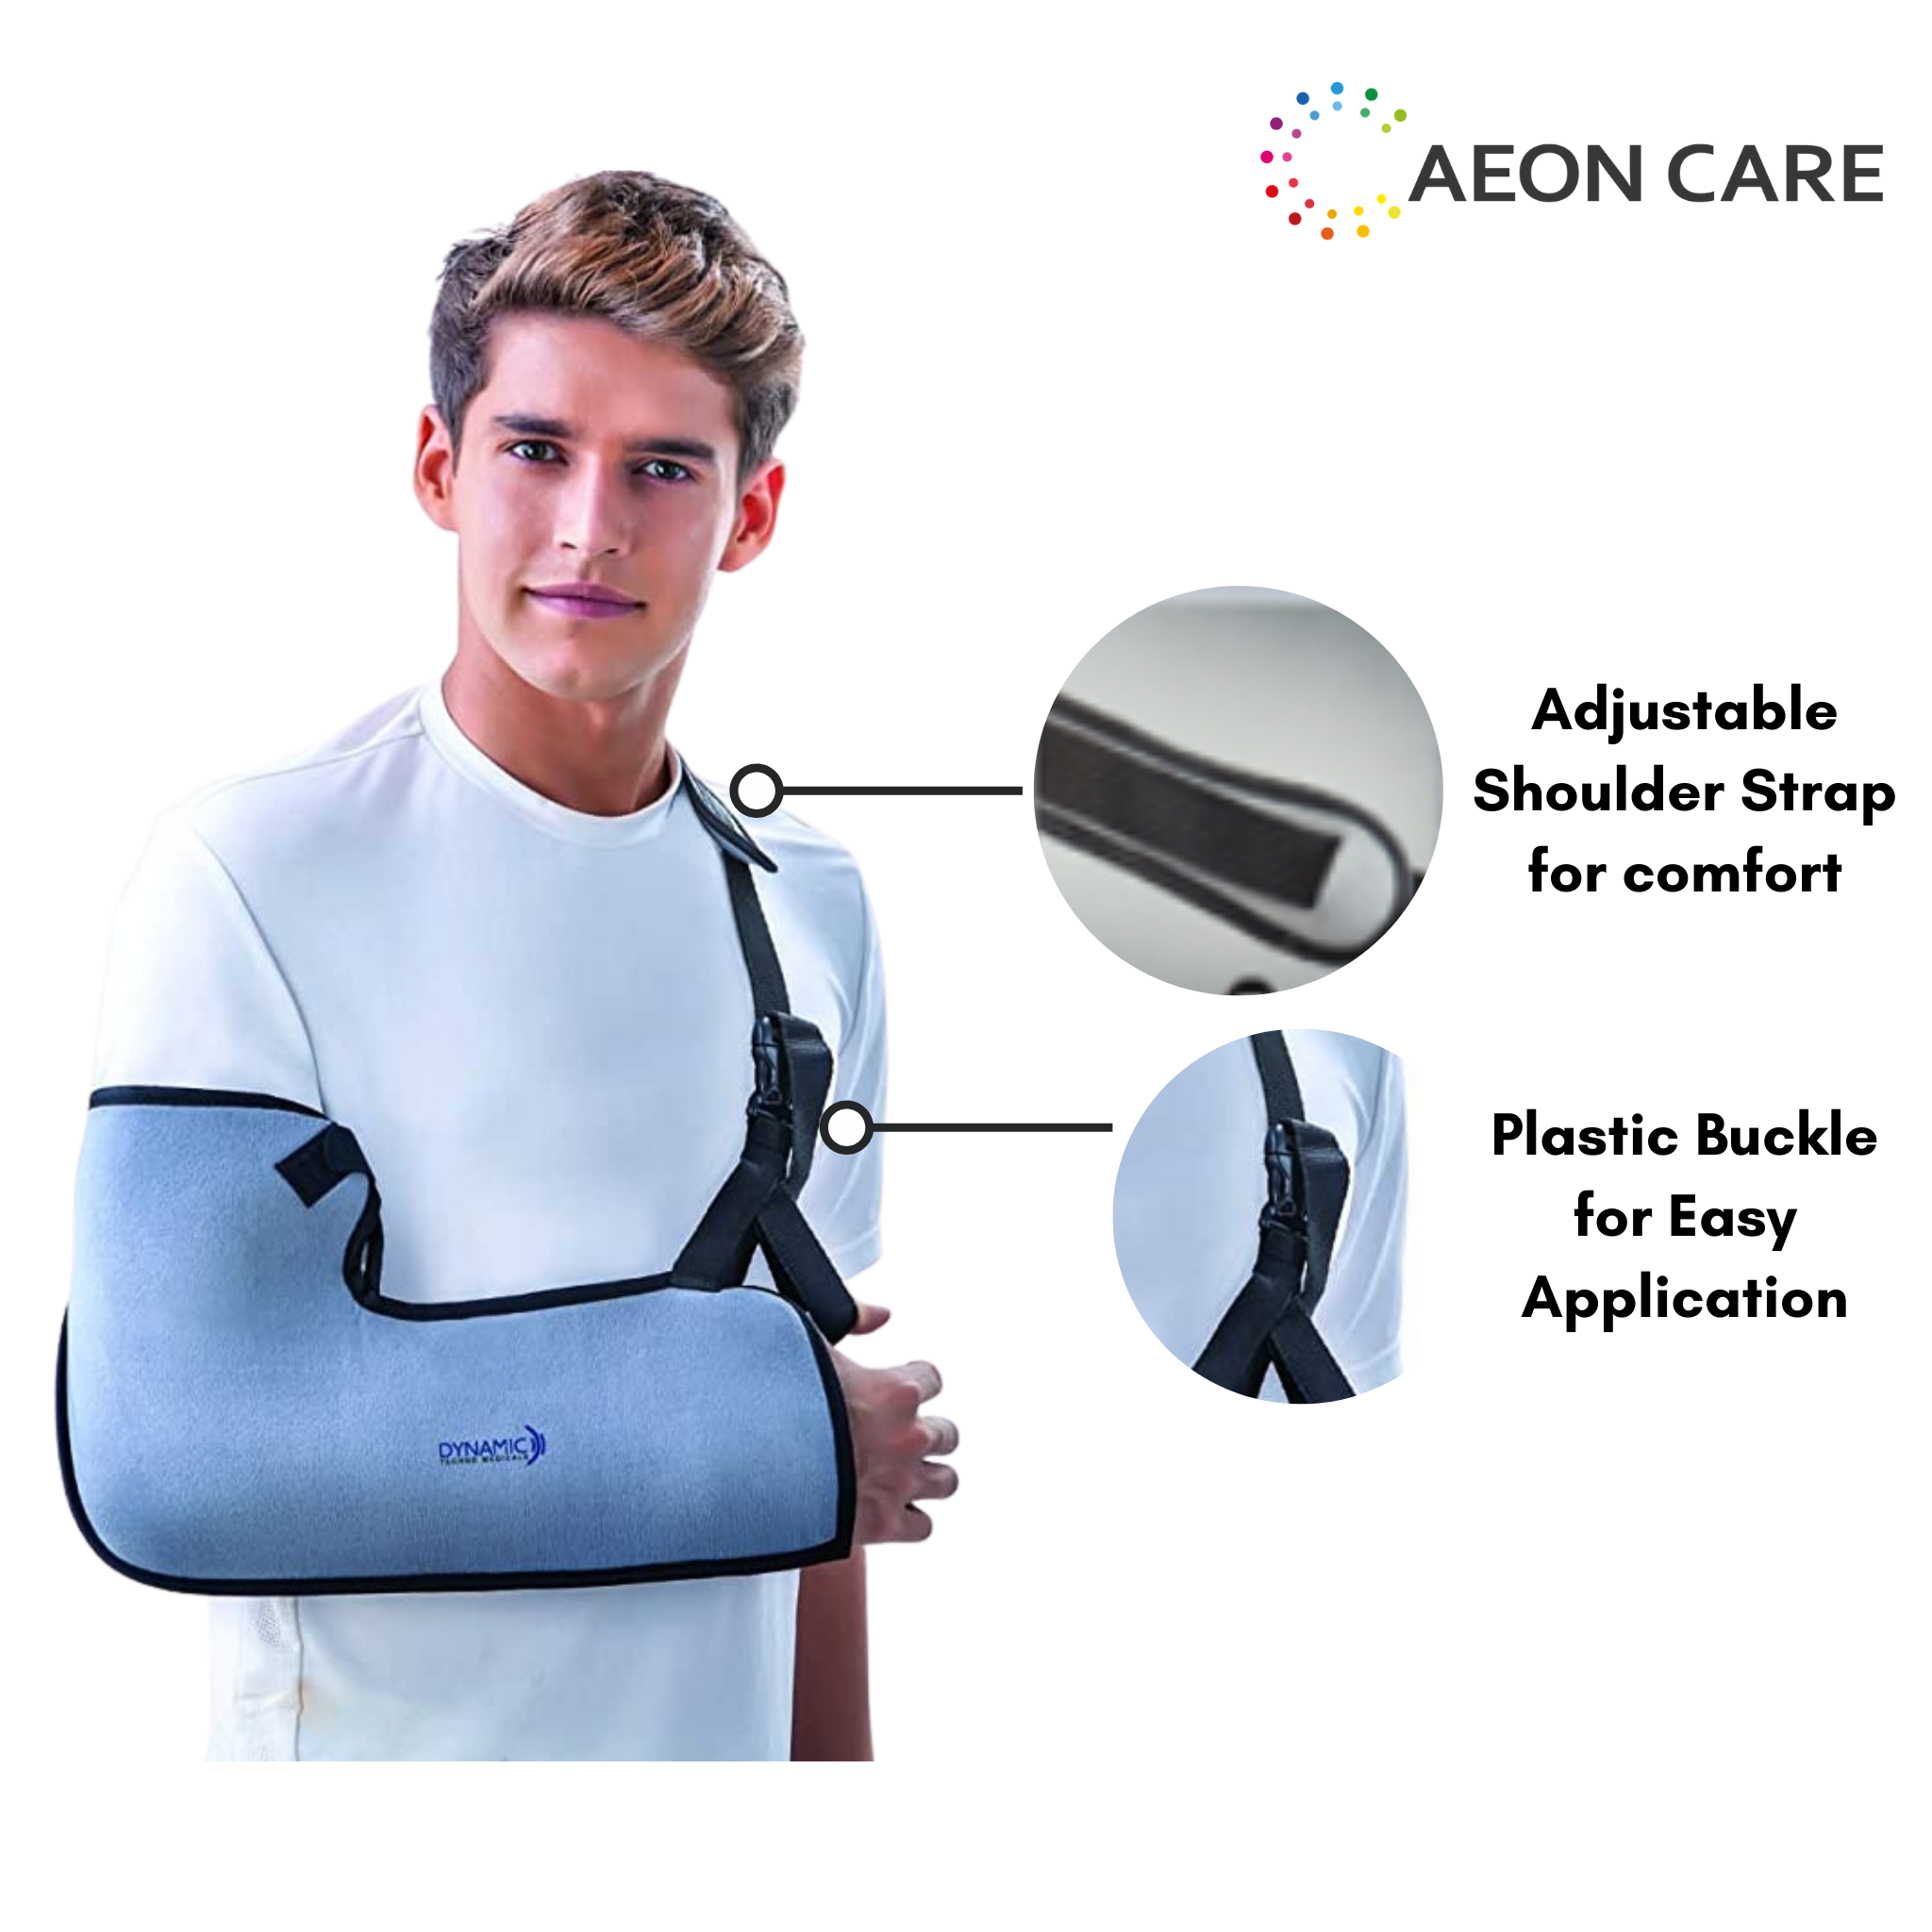 AeonCare  arm shoulder pouch or Hand Plaster belt comes with the adjustable shoulder strap, and plastic buckle for easy application